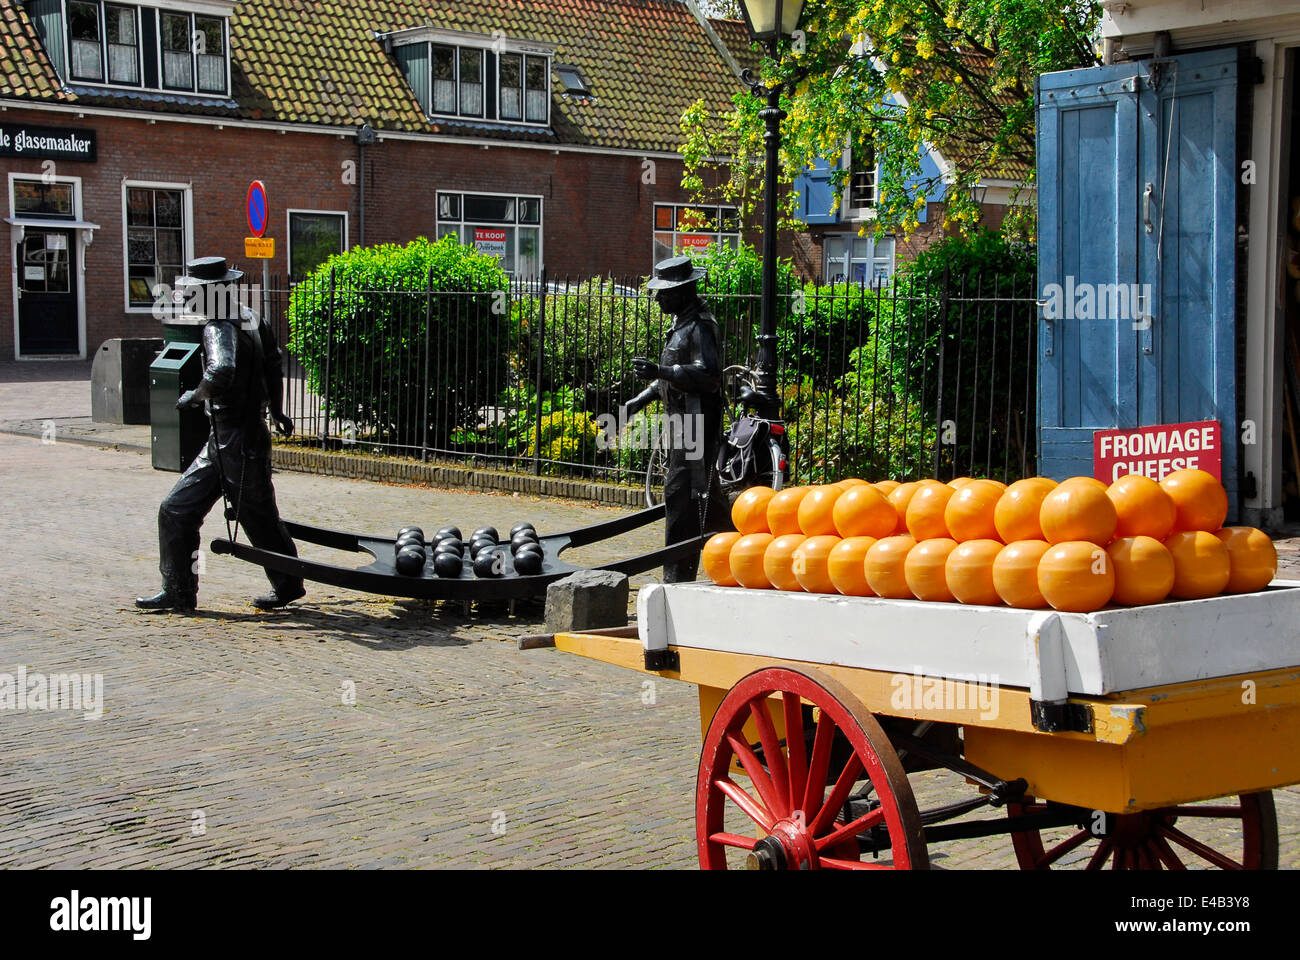 Statue of cheese carriers in the Town of Edam, Netherlands Stock Photo